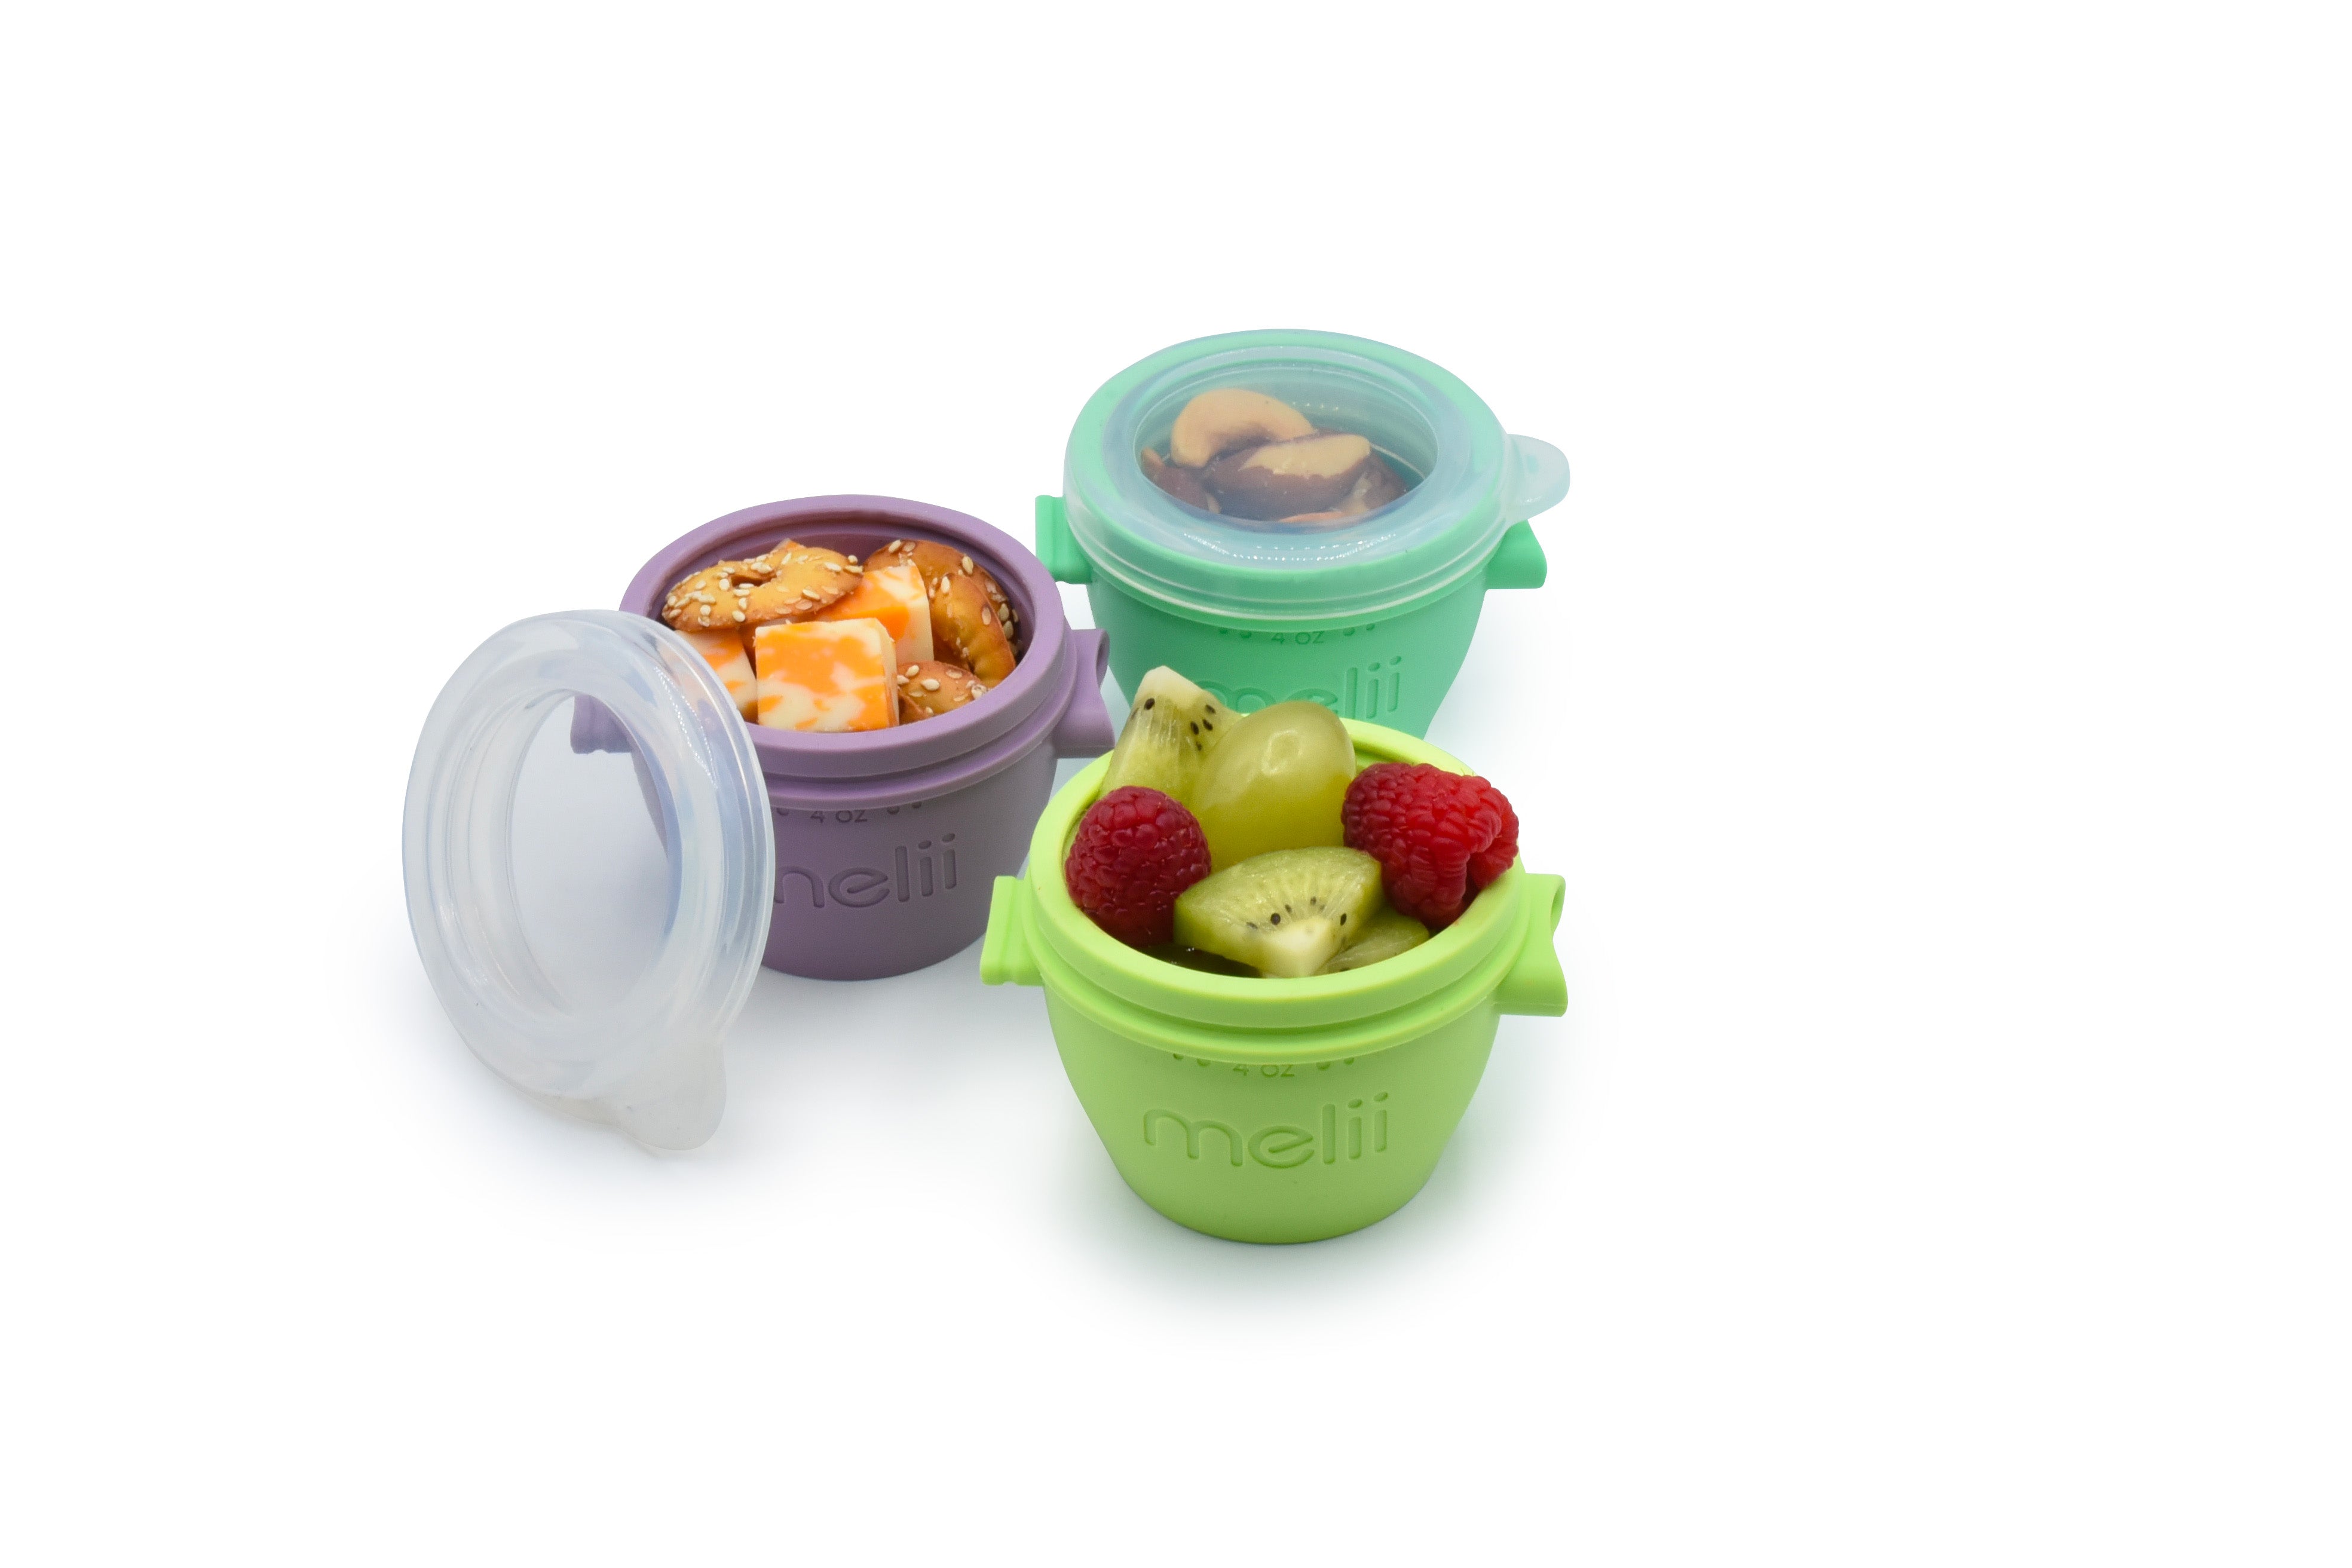 Nesting Silicone Containers, Silicone Baby Food Storage, Baking